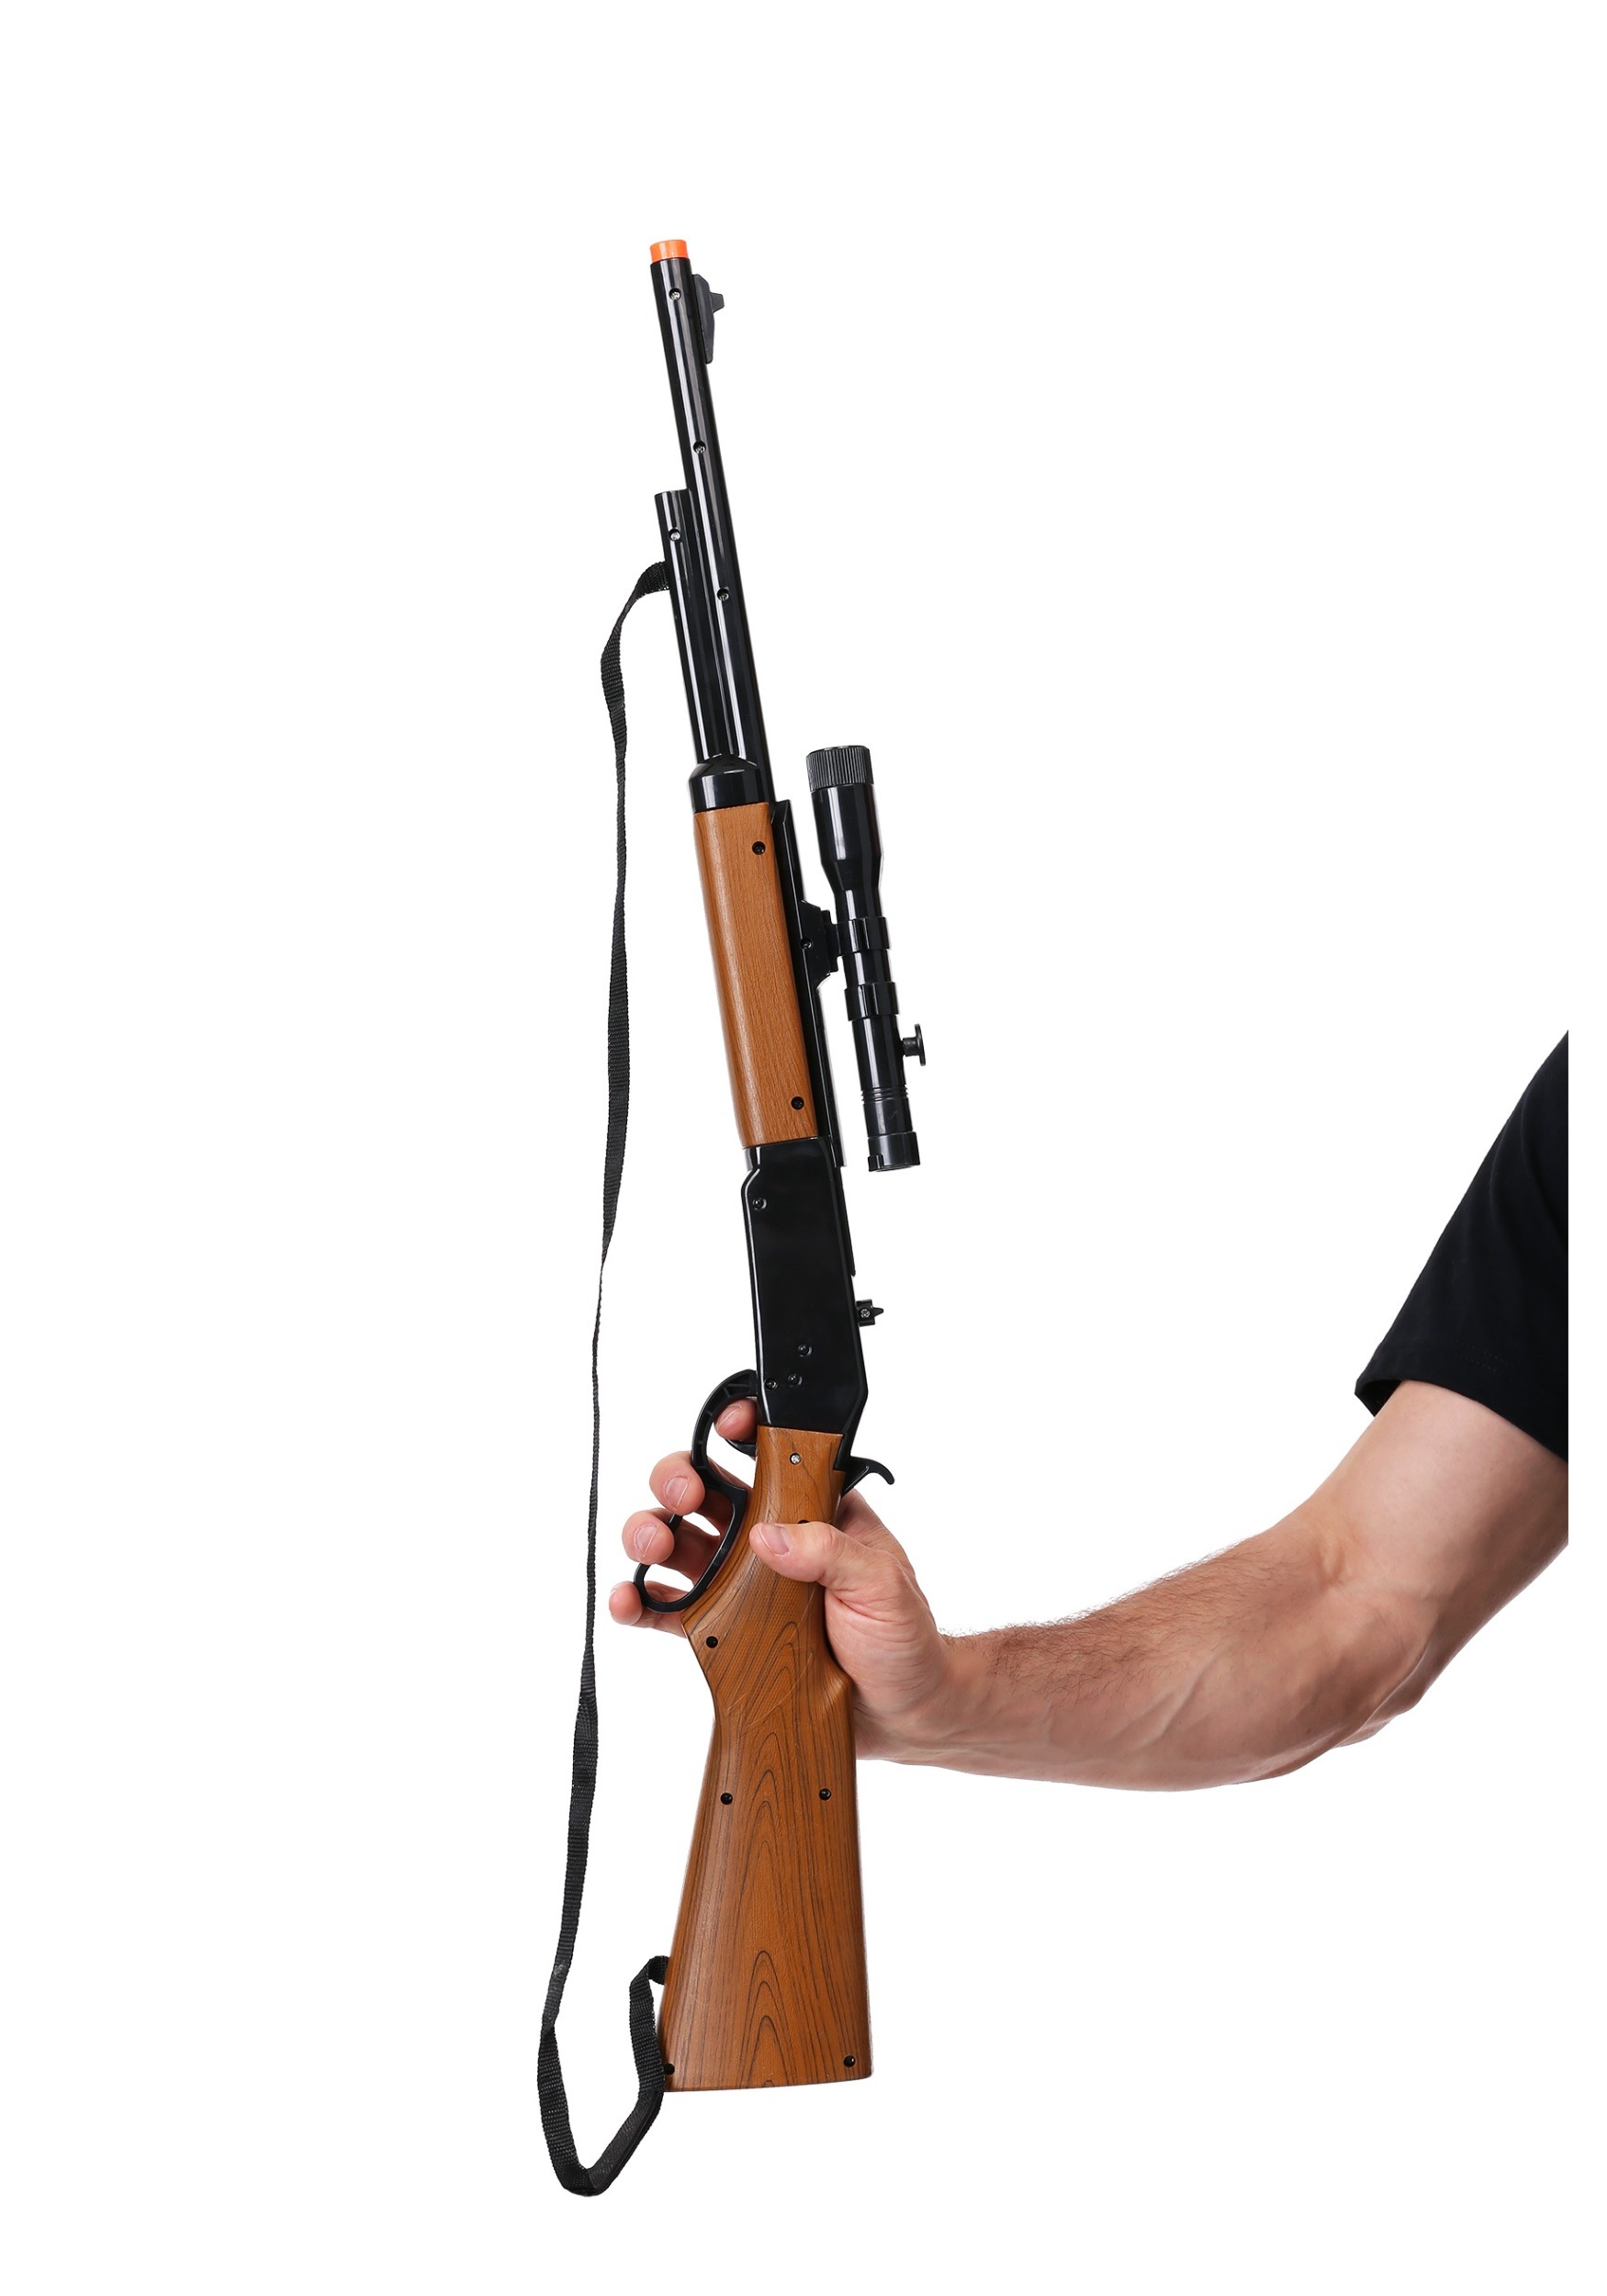 Lever Action Repeater Rifle with Scope Toy Weapon